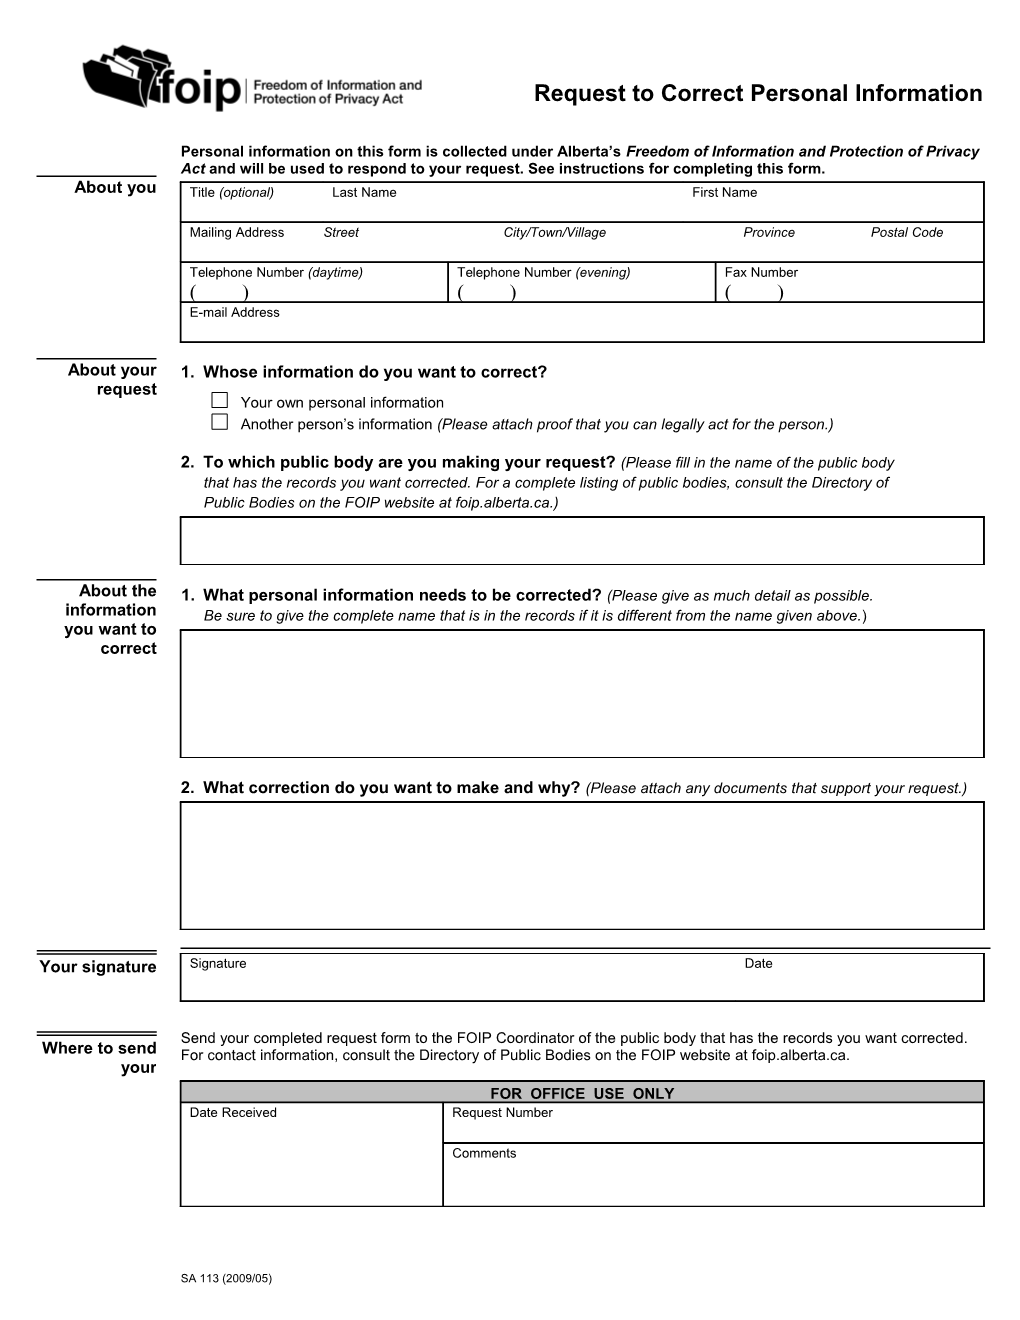 Request to Correct Personal Information Form